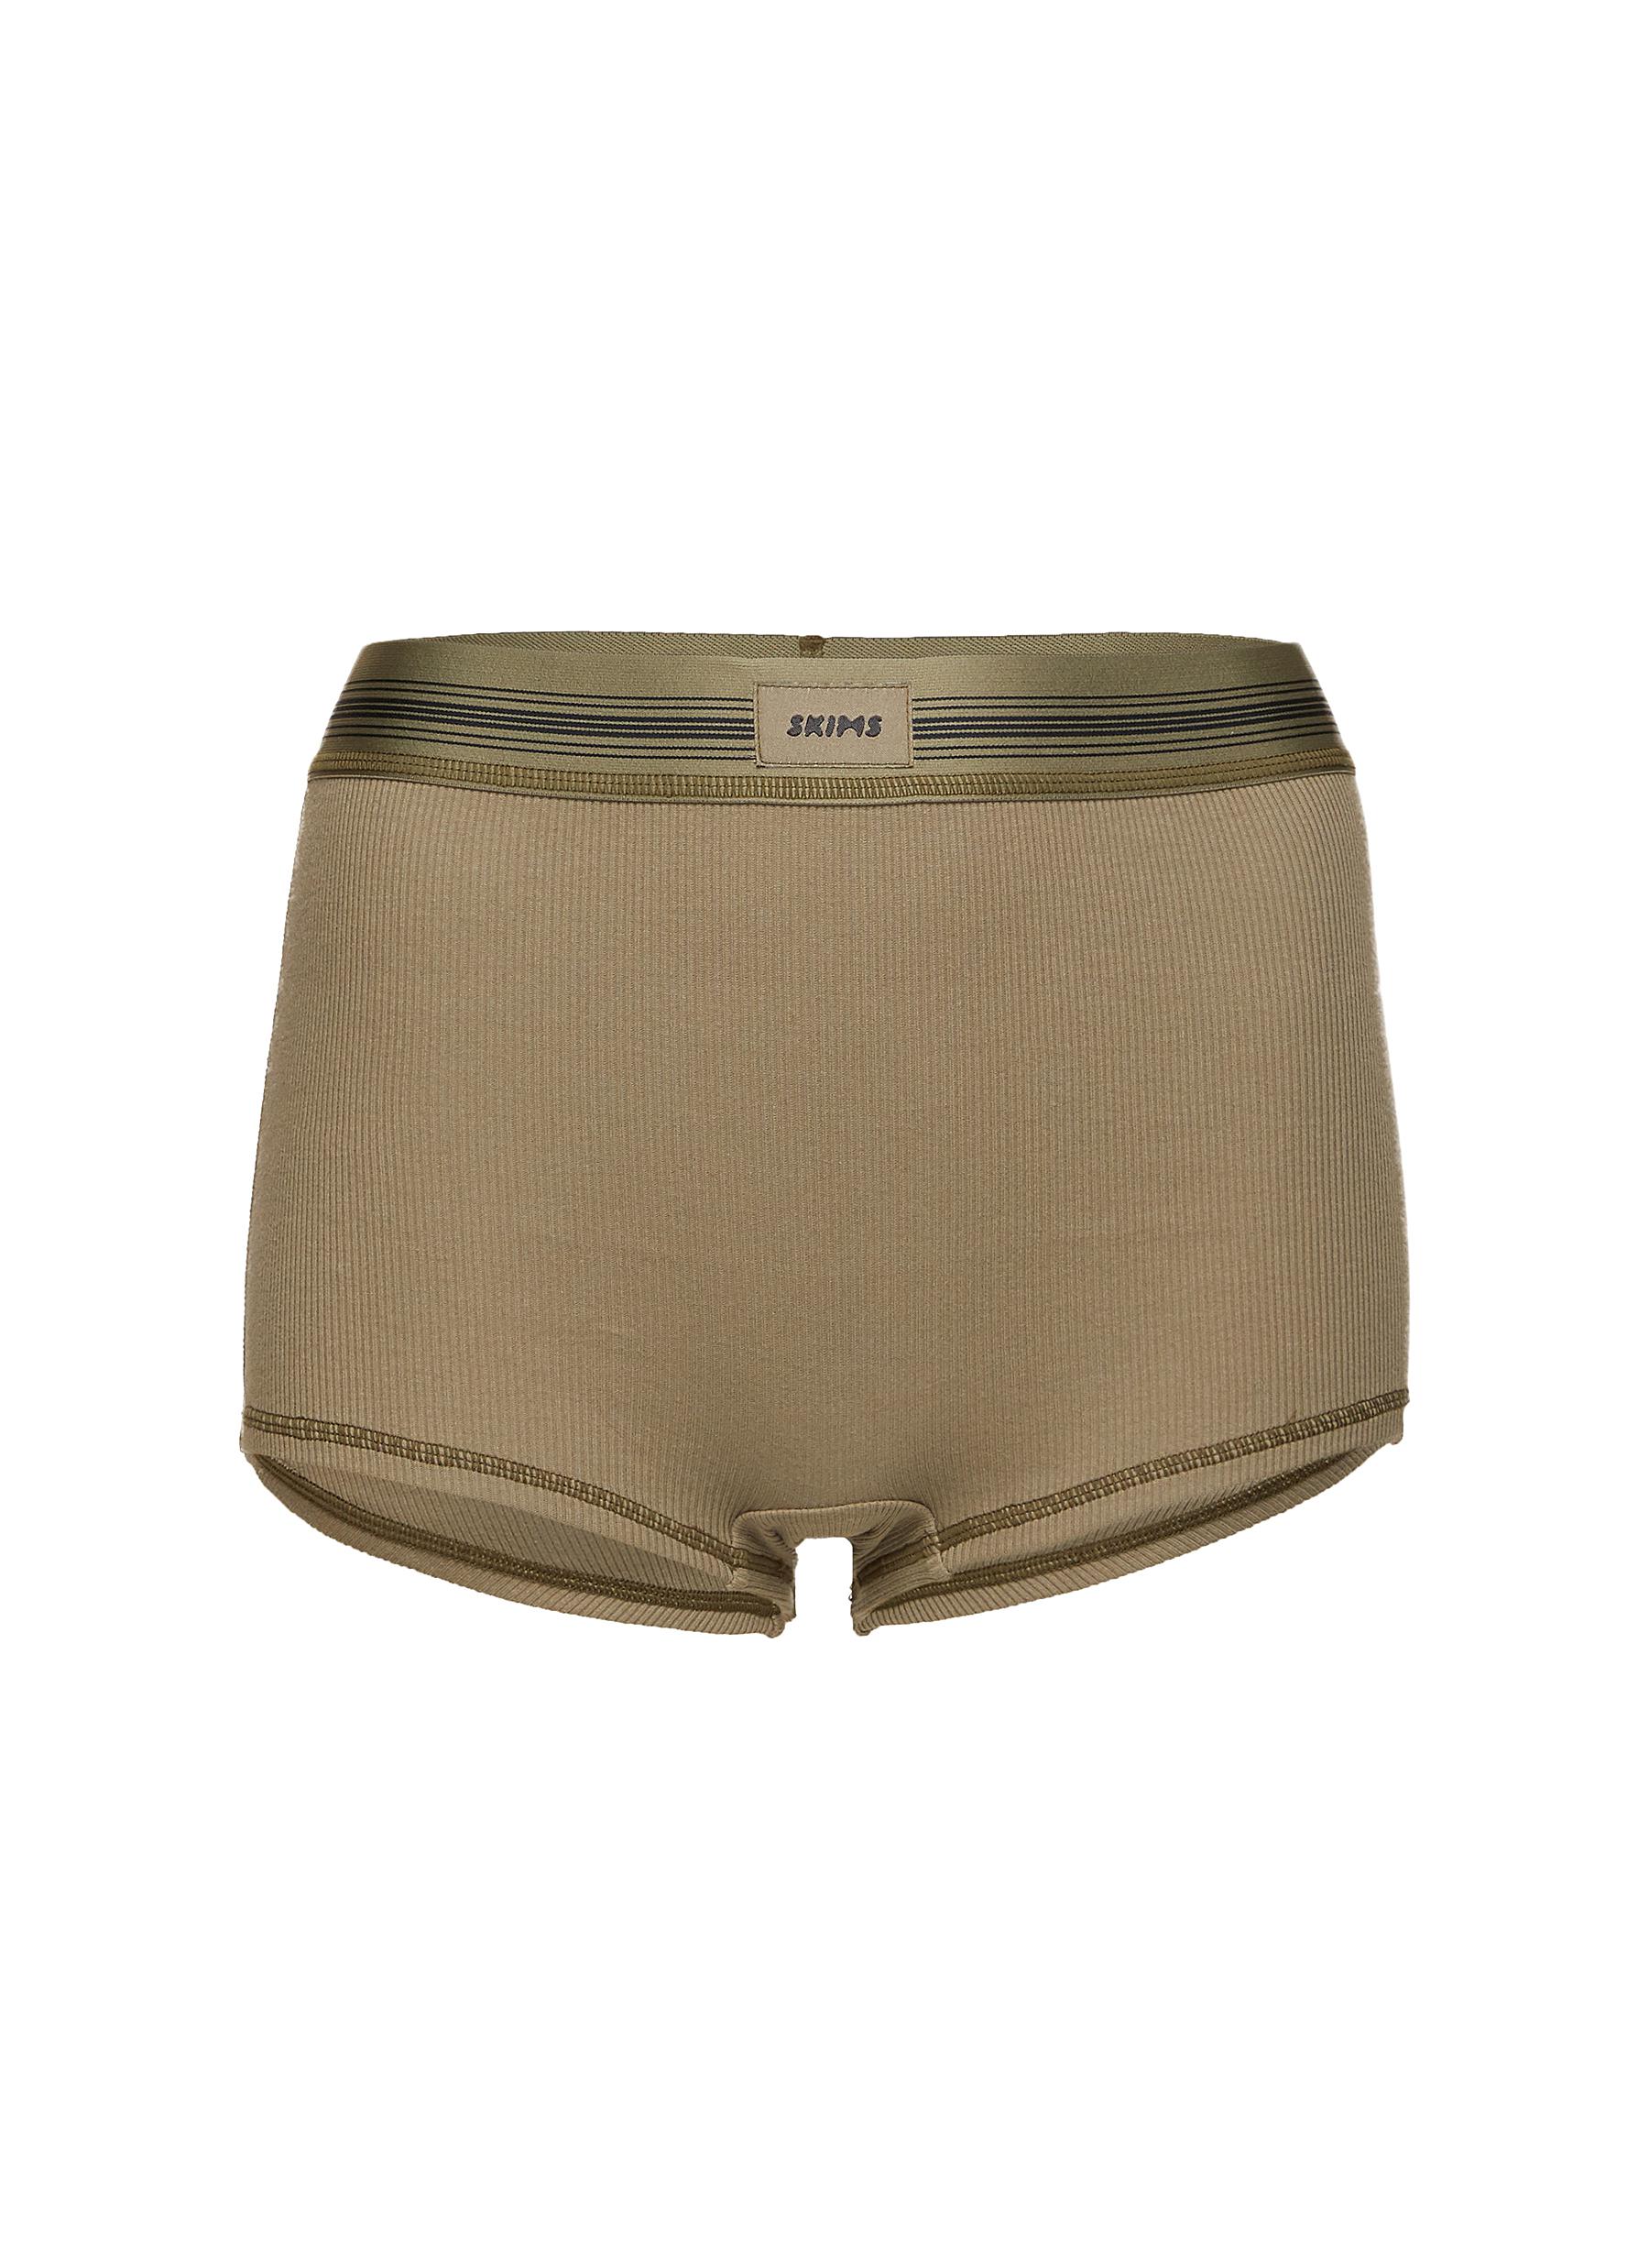 Underwear as outerwear: Women's boxer shorts will be your summer holiday  best friend